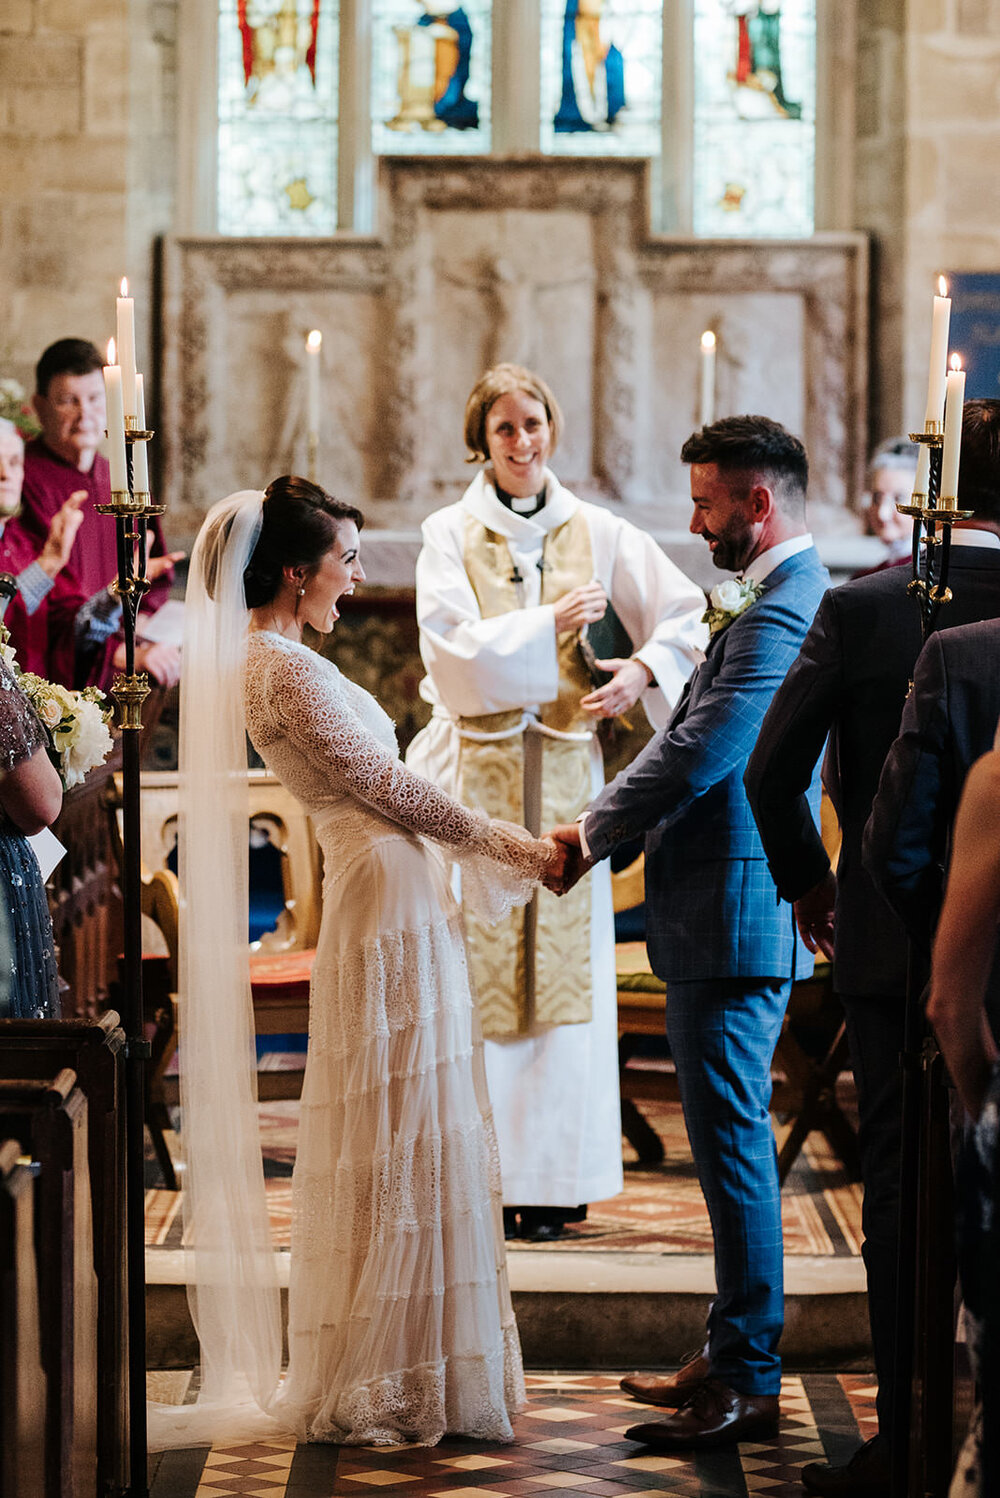 Bride holds groom's hands and leans back with mouth open as she cannot contain her excitement after the first kiss during their religious wedding ceremony in the Cotswolds